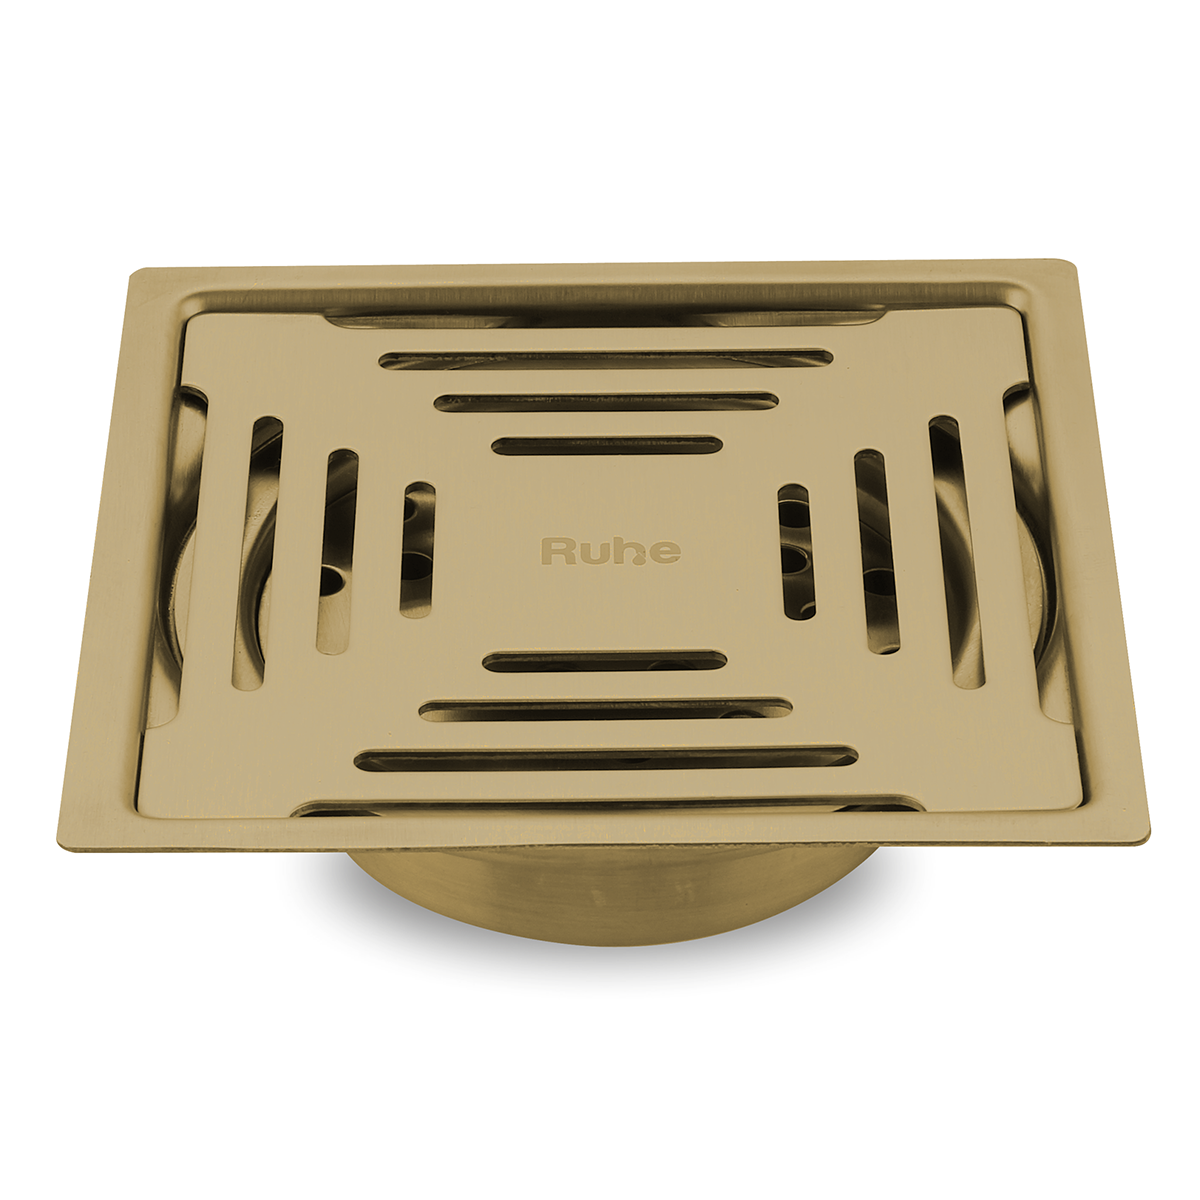 Opal Square Flat Cut Floor Drain in Yellow Gold PVD Coating (5 x 5 Inches)